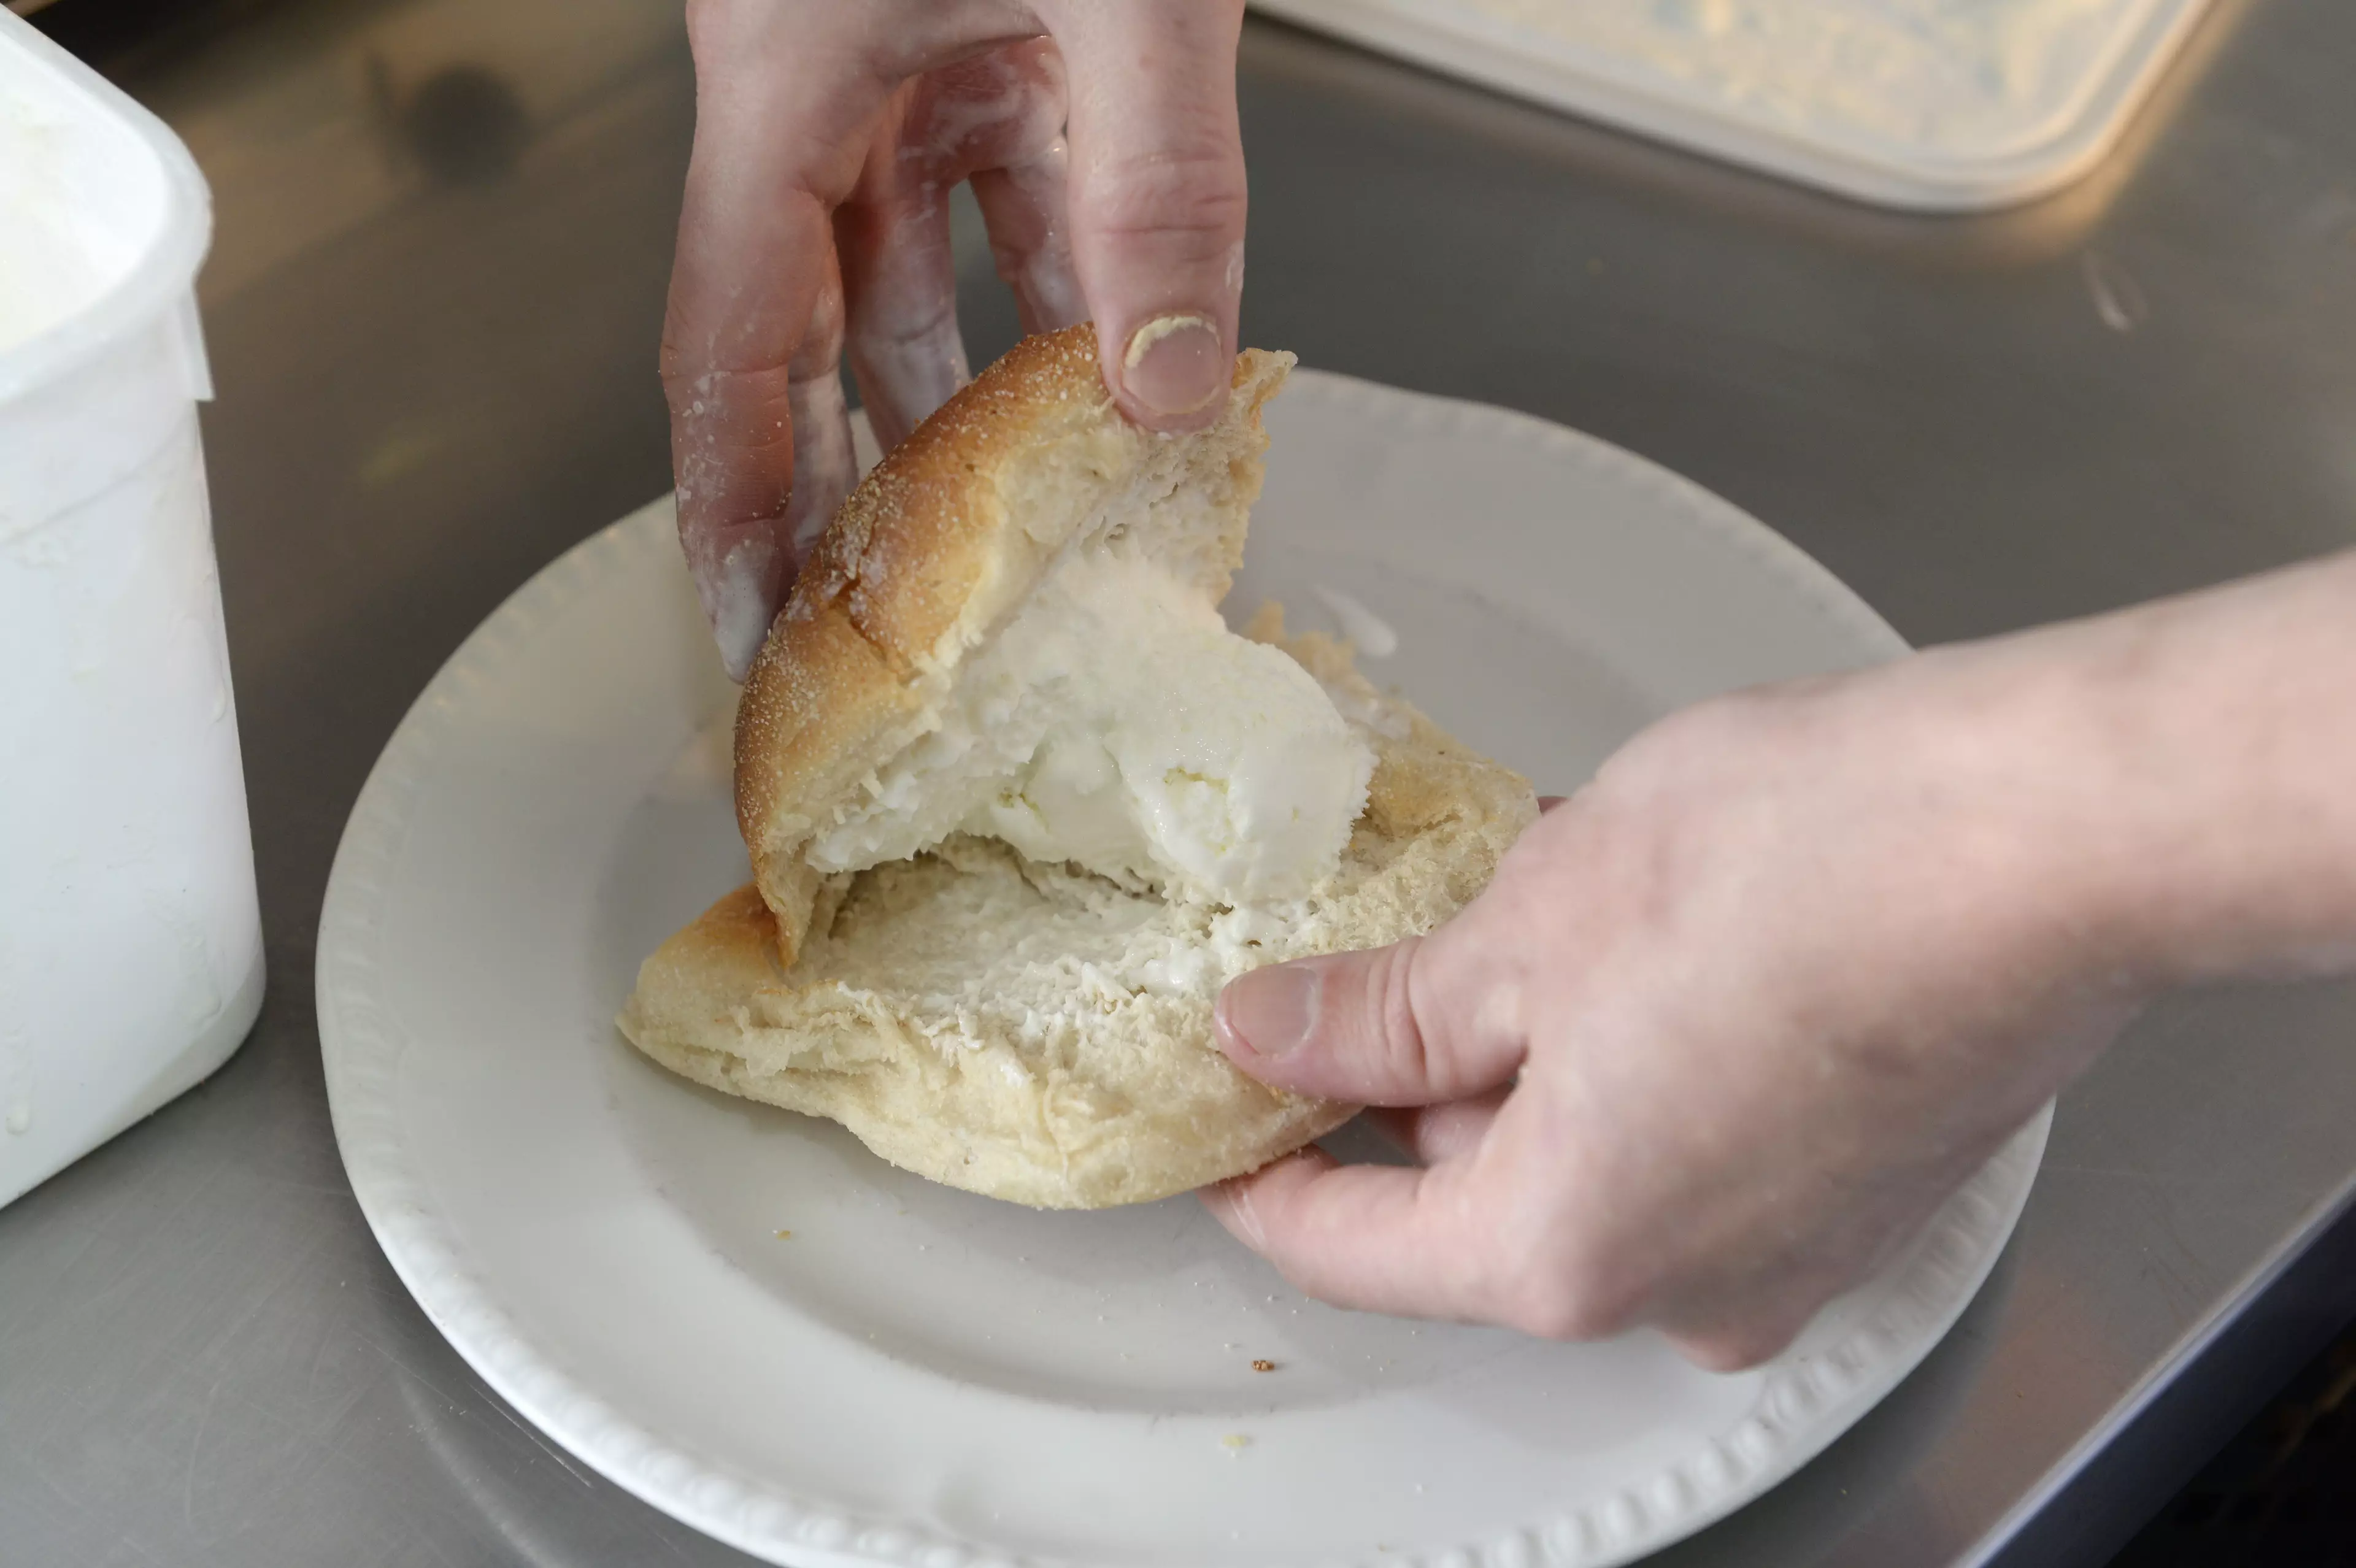 A scoop of ice cream is placed in a bread roll, then deep fried.